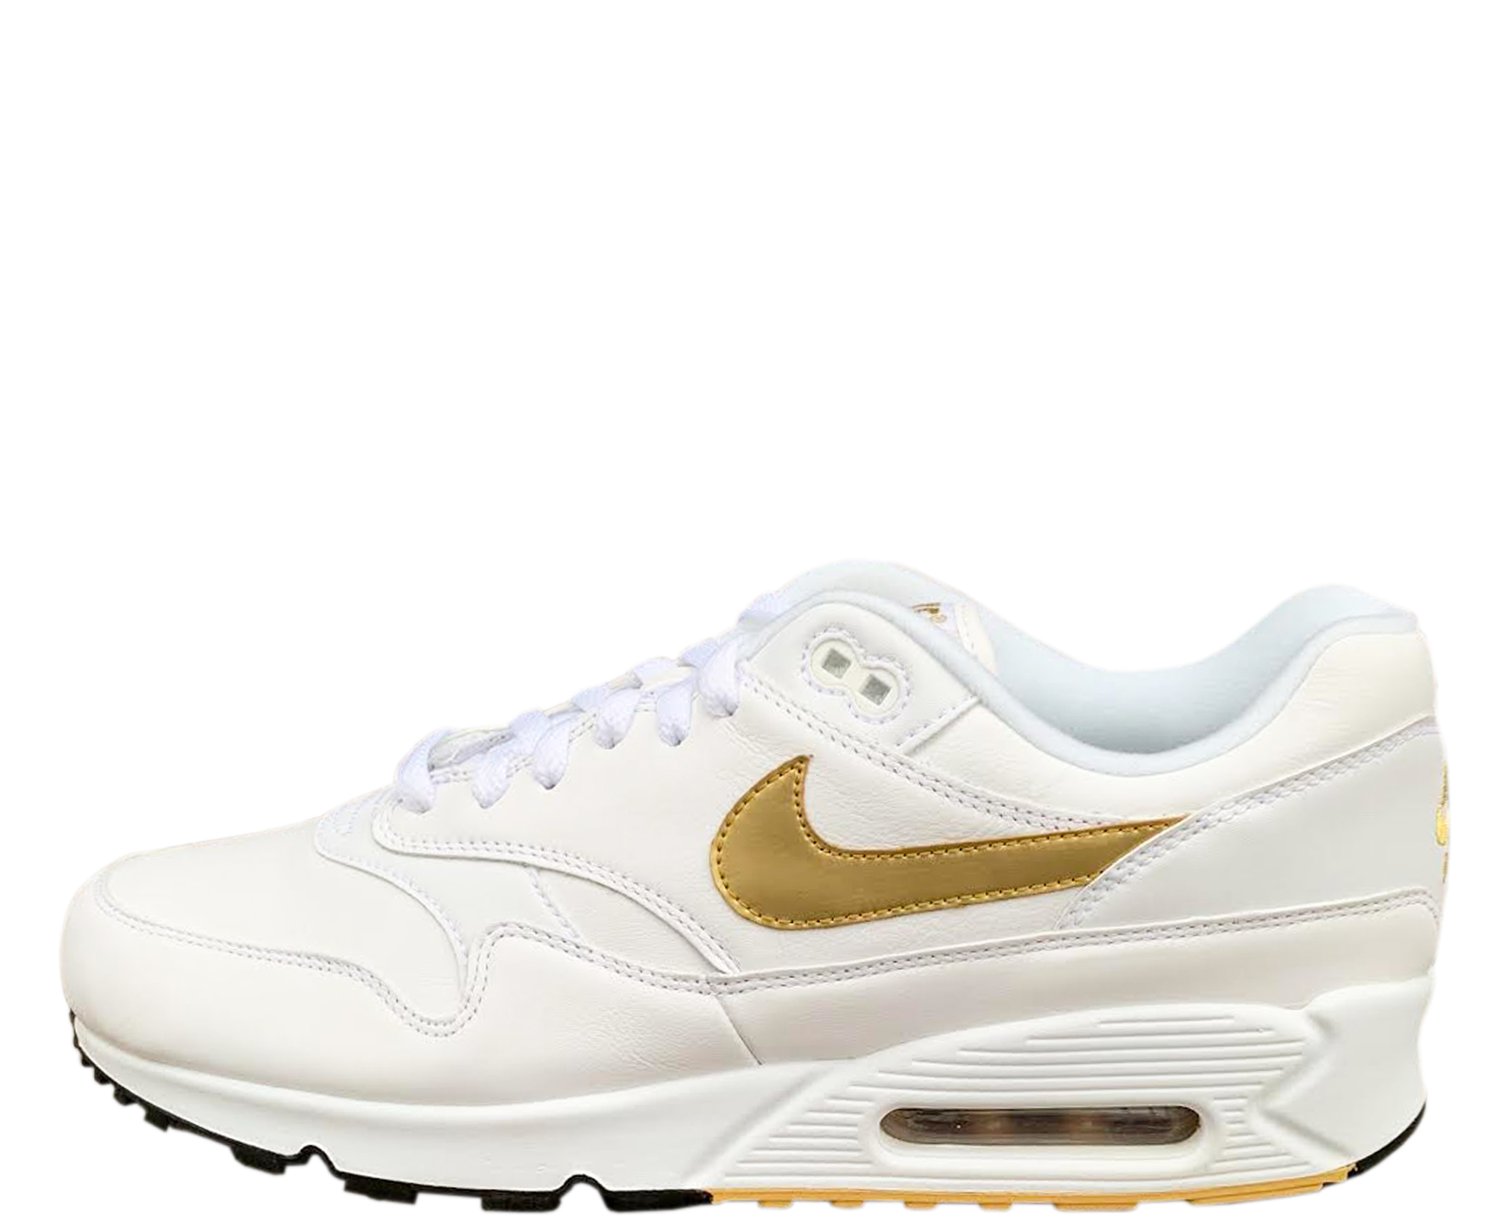 Nike Air Max 90/1 White Metallic Gold (Size 11) DS — Roots